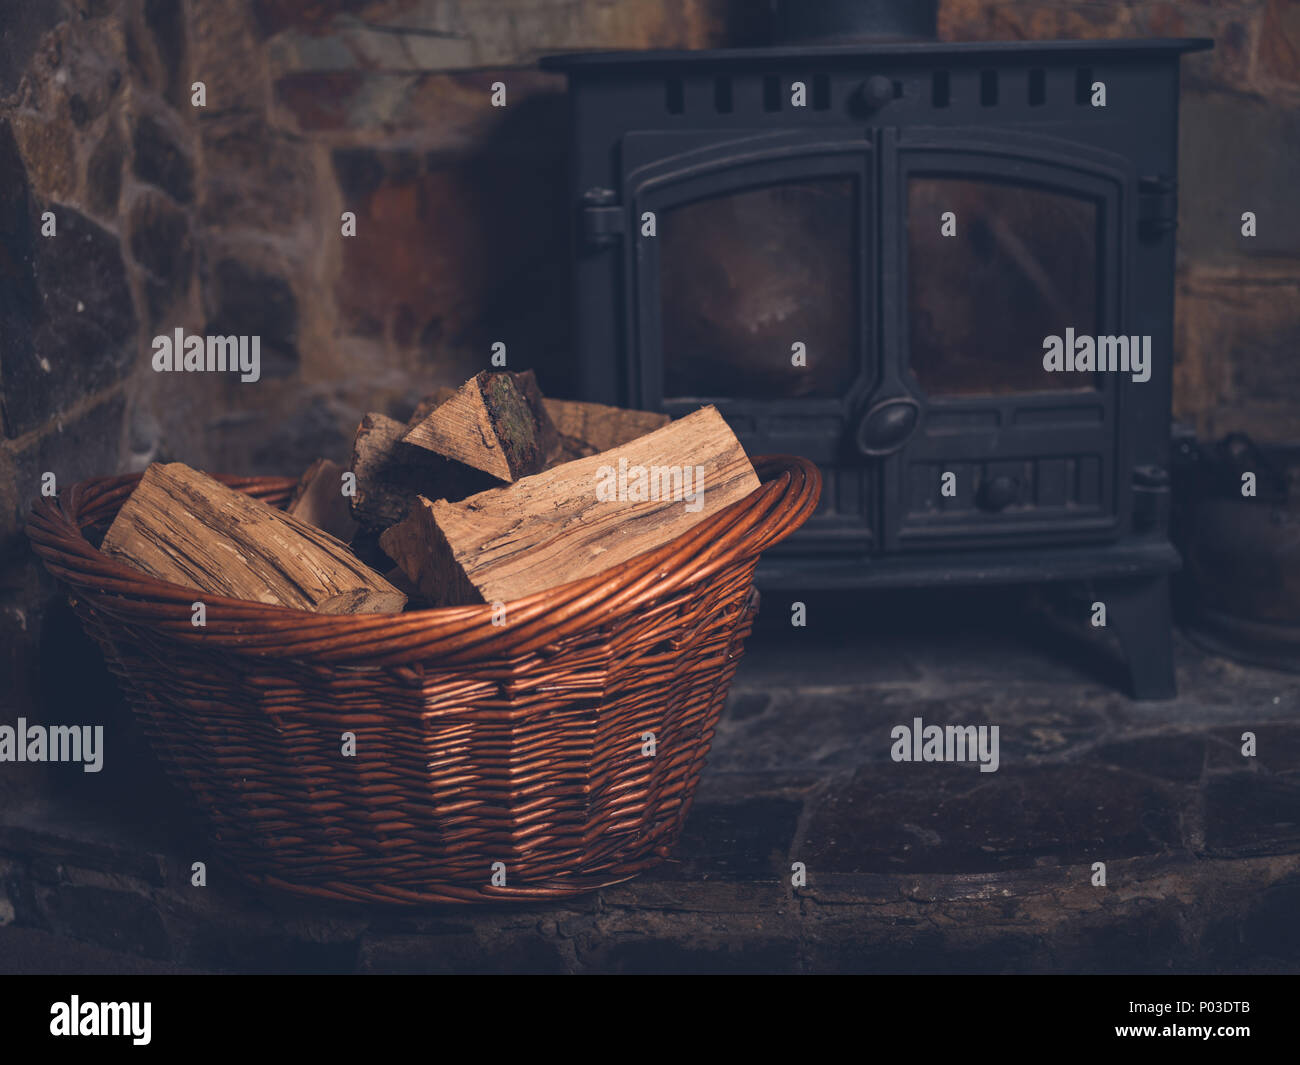 A basket full of firewood by a log burner Stock Photo